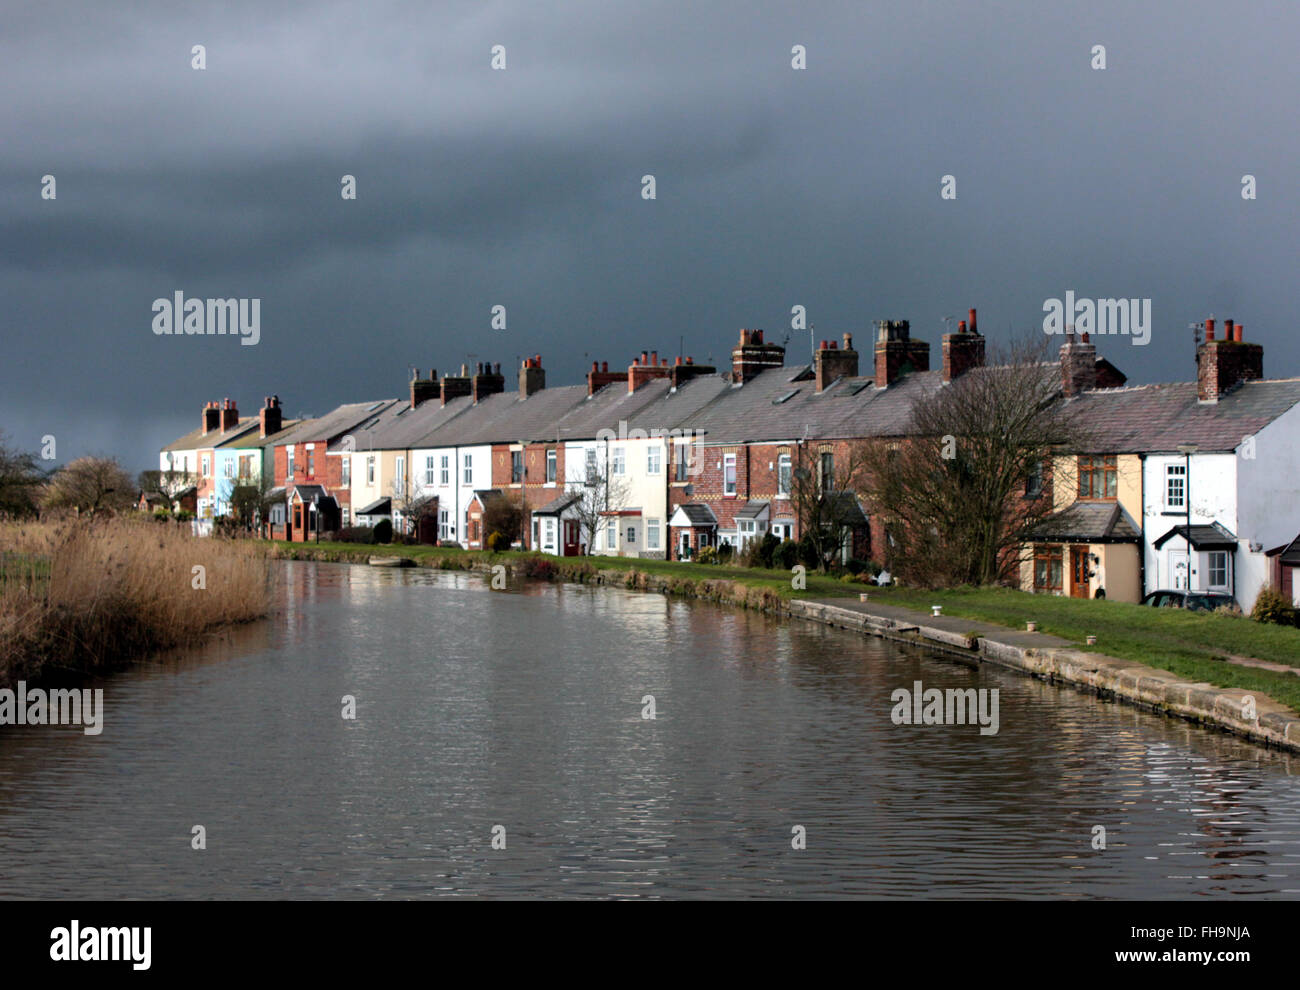 A Storm Brews Over Canal Side Cottages Alongside The Leeds And